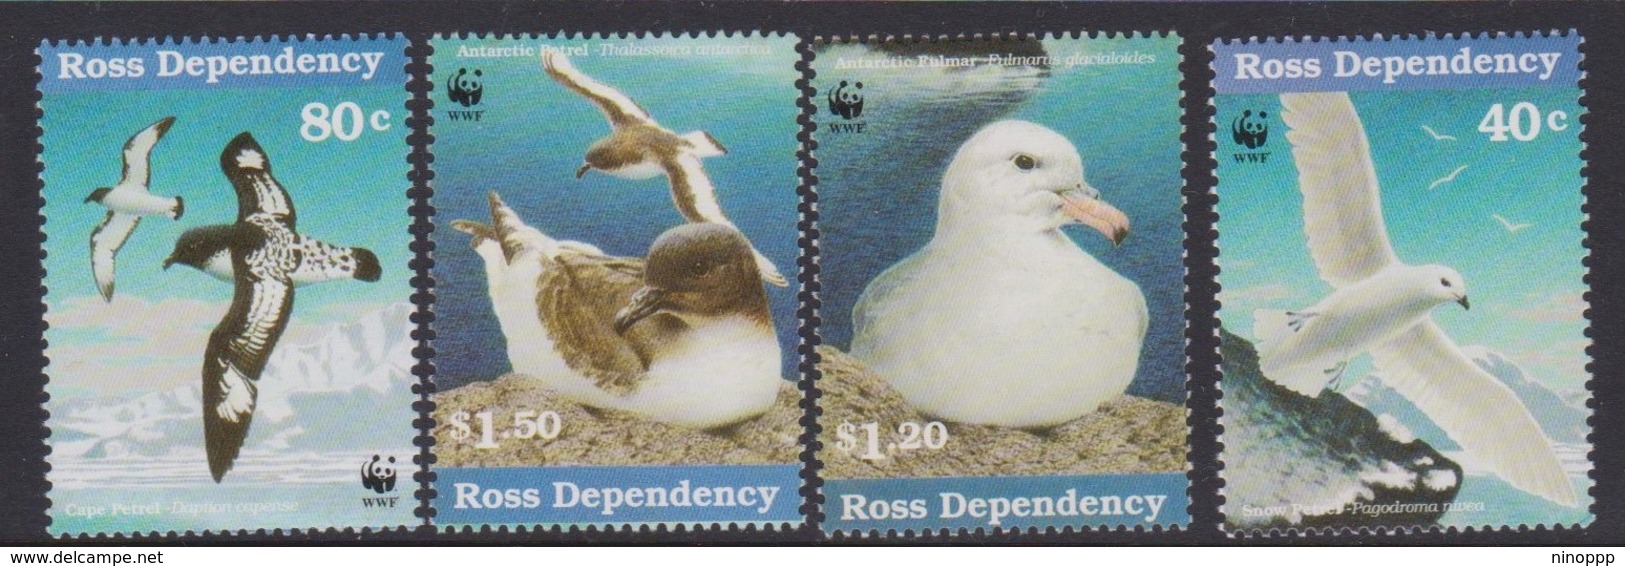 New Zealand-Ross Dependency  SG 44-47 1997 WWF Birds, Mint Never Hinged - Unused Stamps